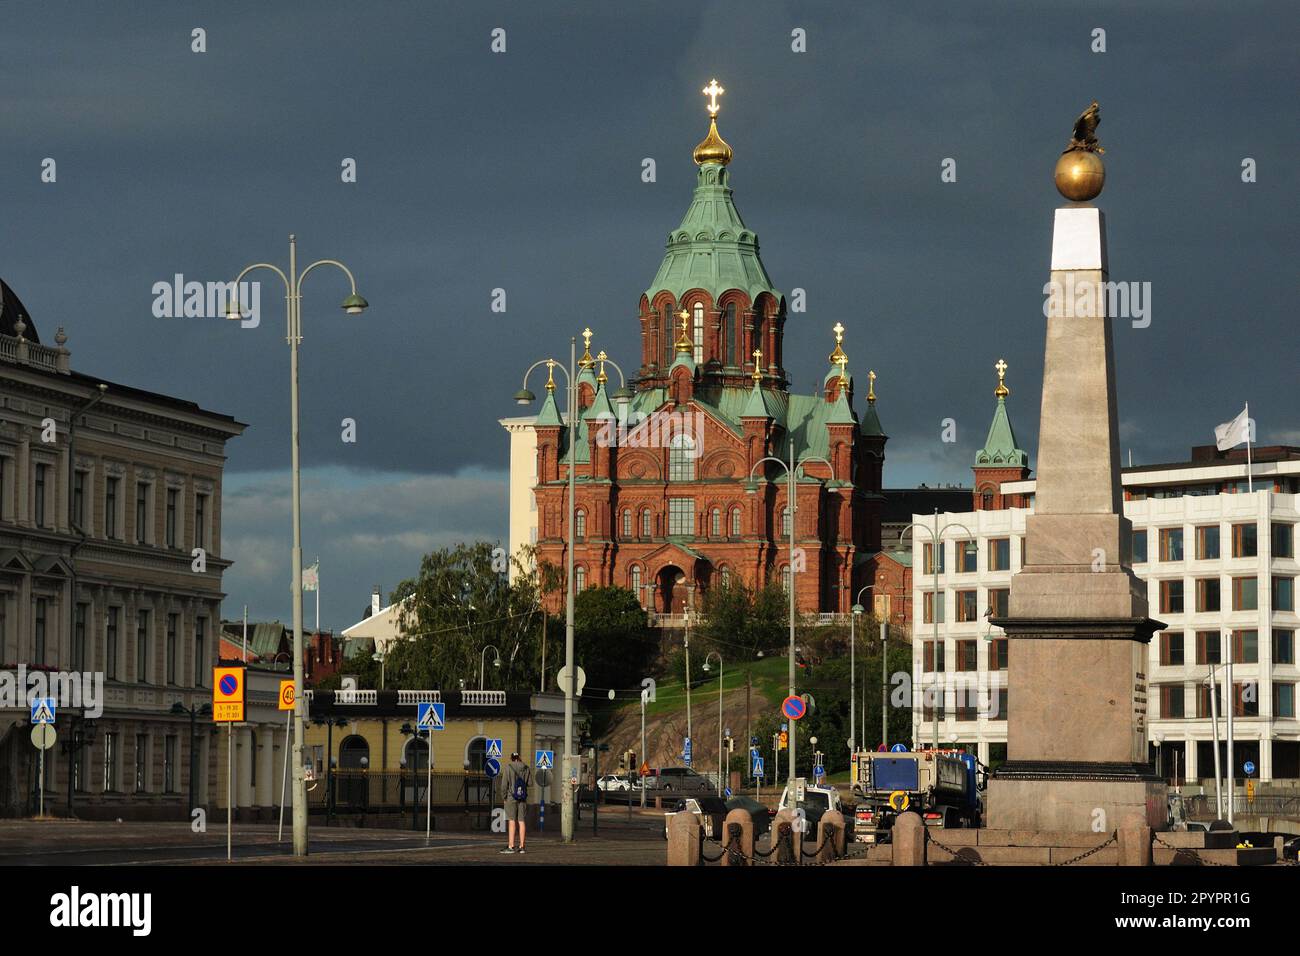 View From The Market Place To The Uspenski Cathedral Helsinki Finland On A Beautiful Sunny Summer Day With A Few Clouds In The Sky Stock Photo